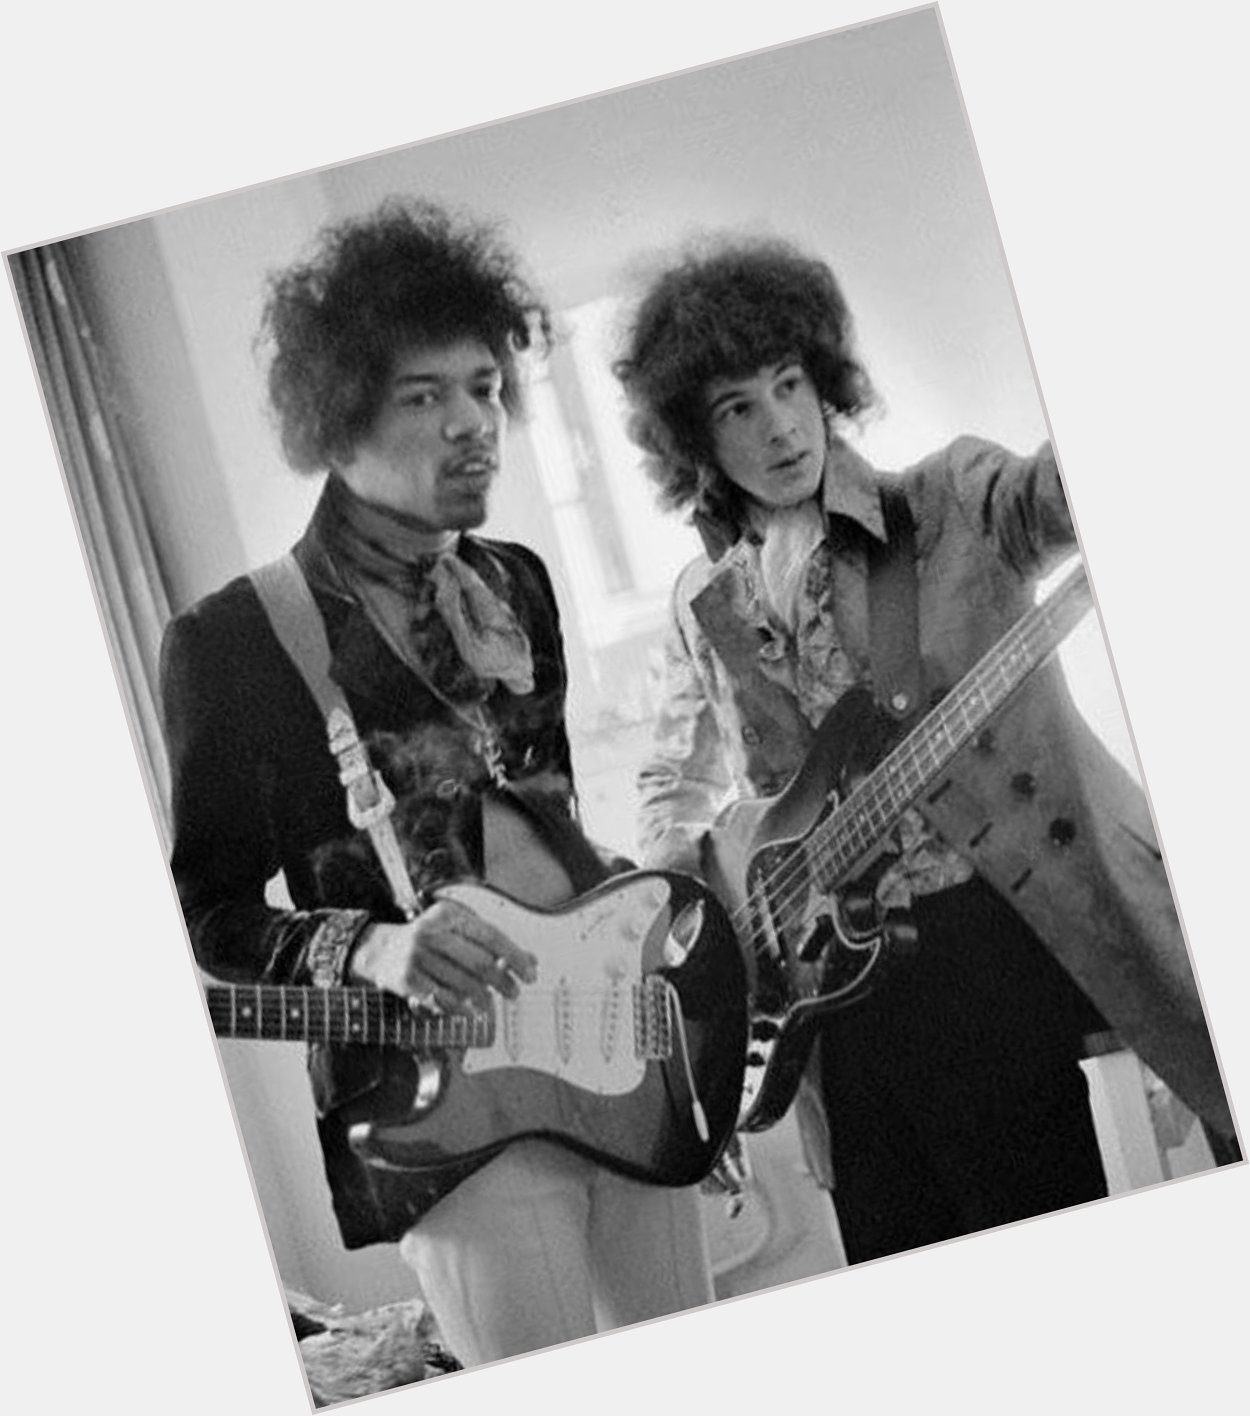 Merry and happy birthday to the late Noel Redding of the Jimi Experience! 